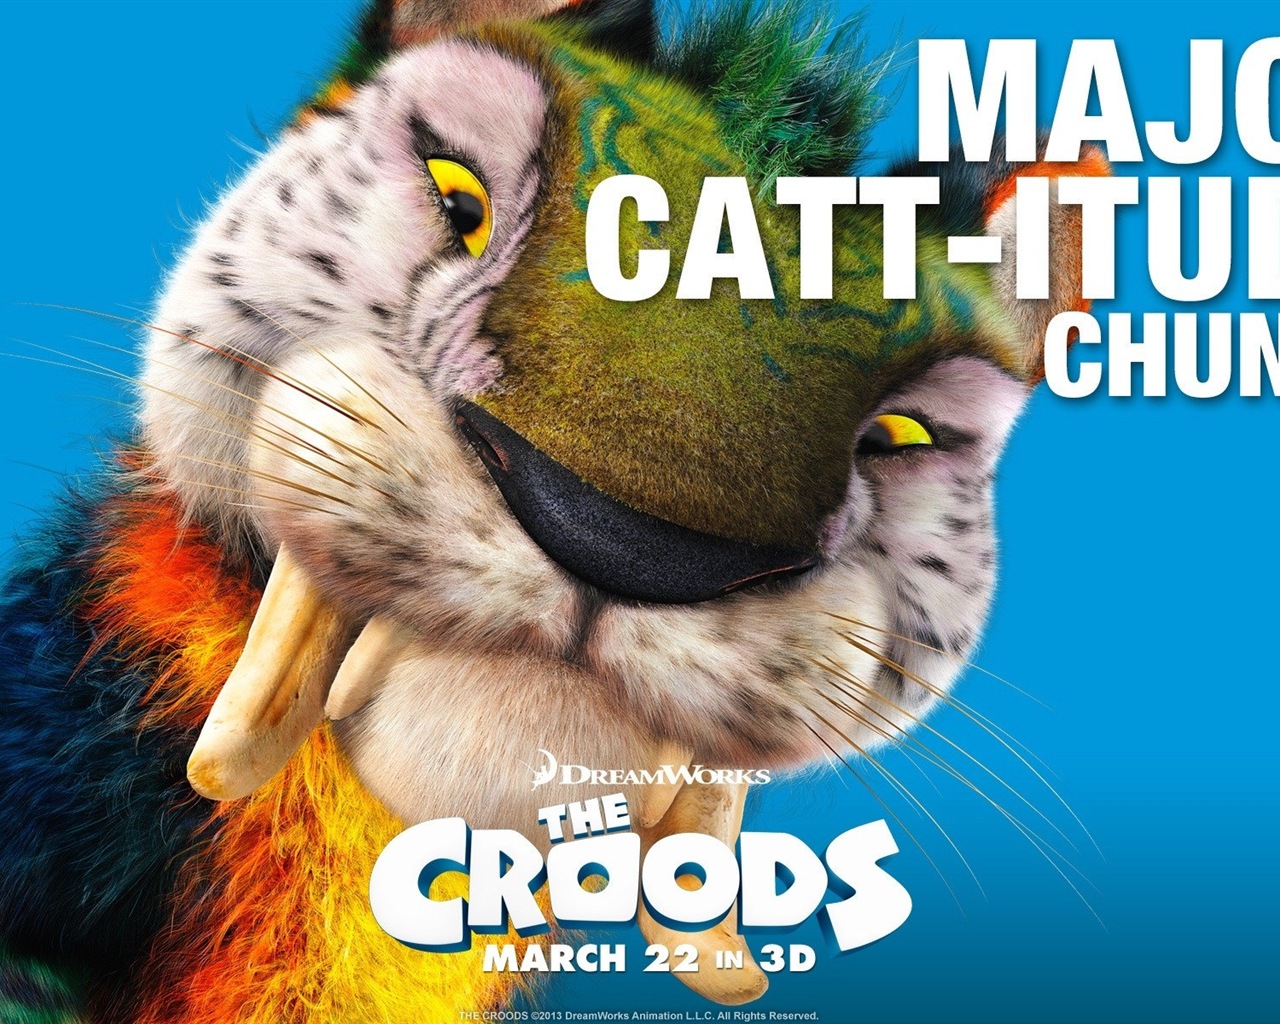 The Croods HD movie wallpapers #12 - 1280x1024